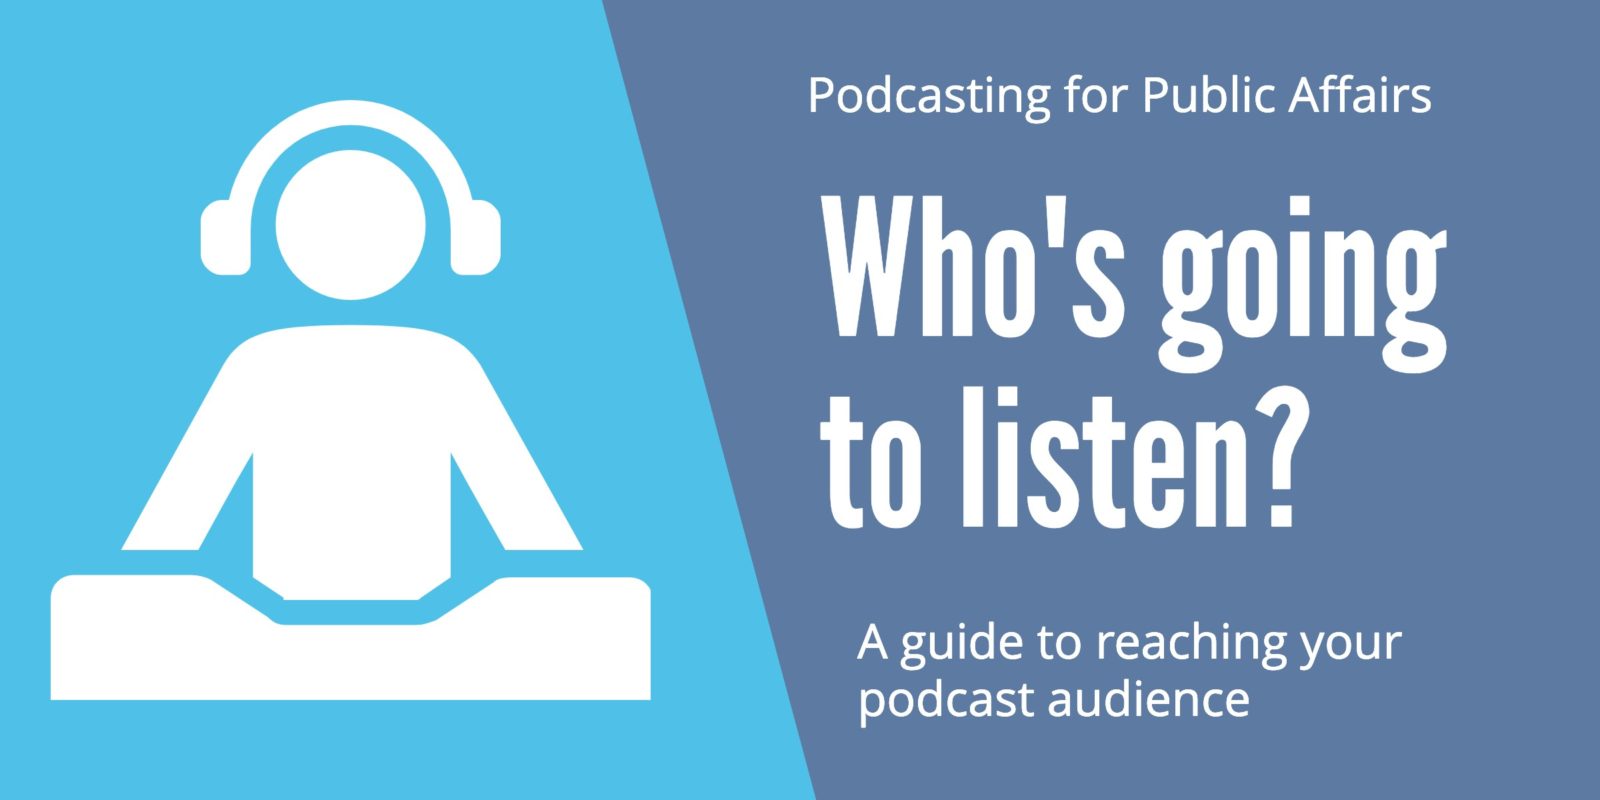 Starting a public affairs podcast? Don’t skip 1 important task!